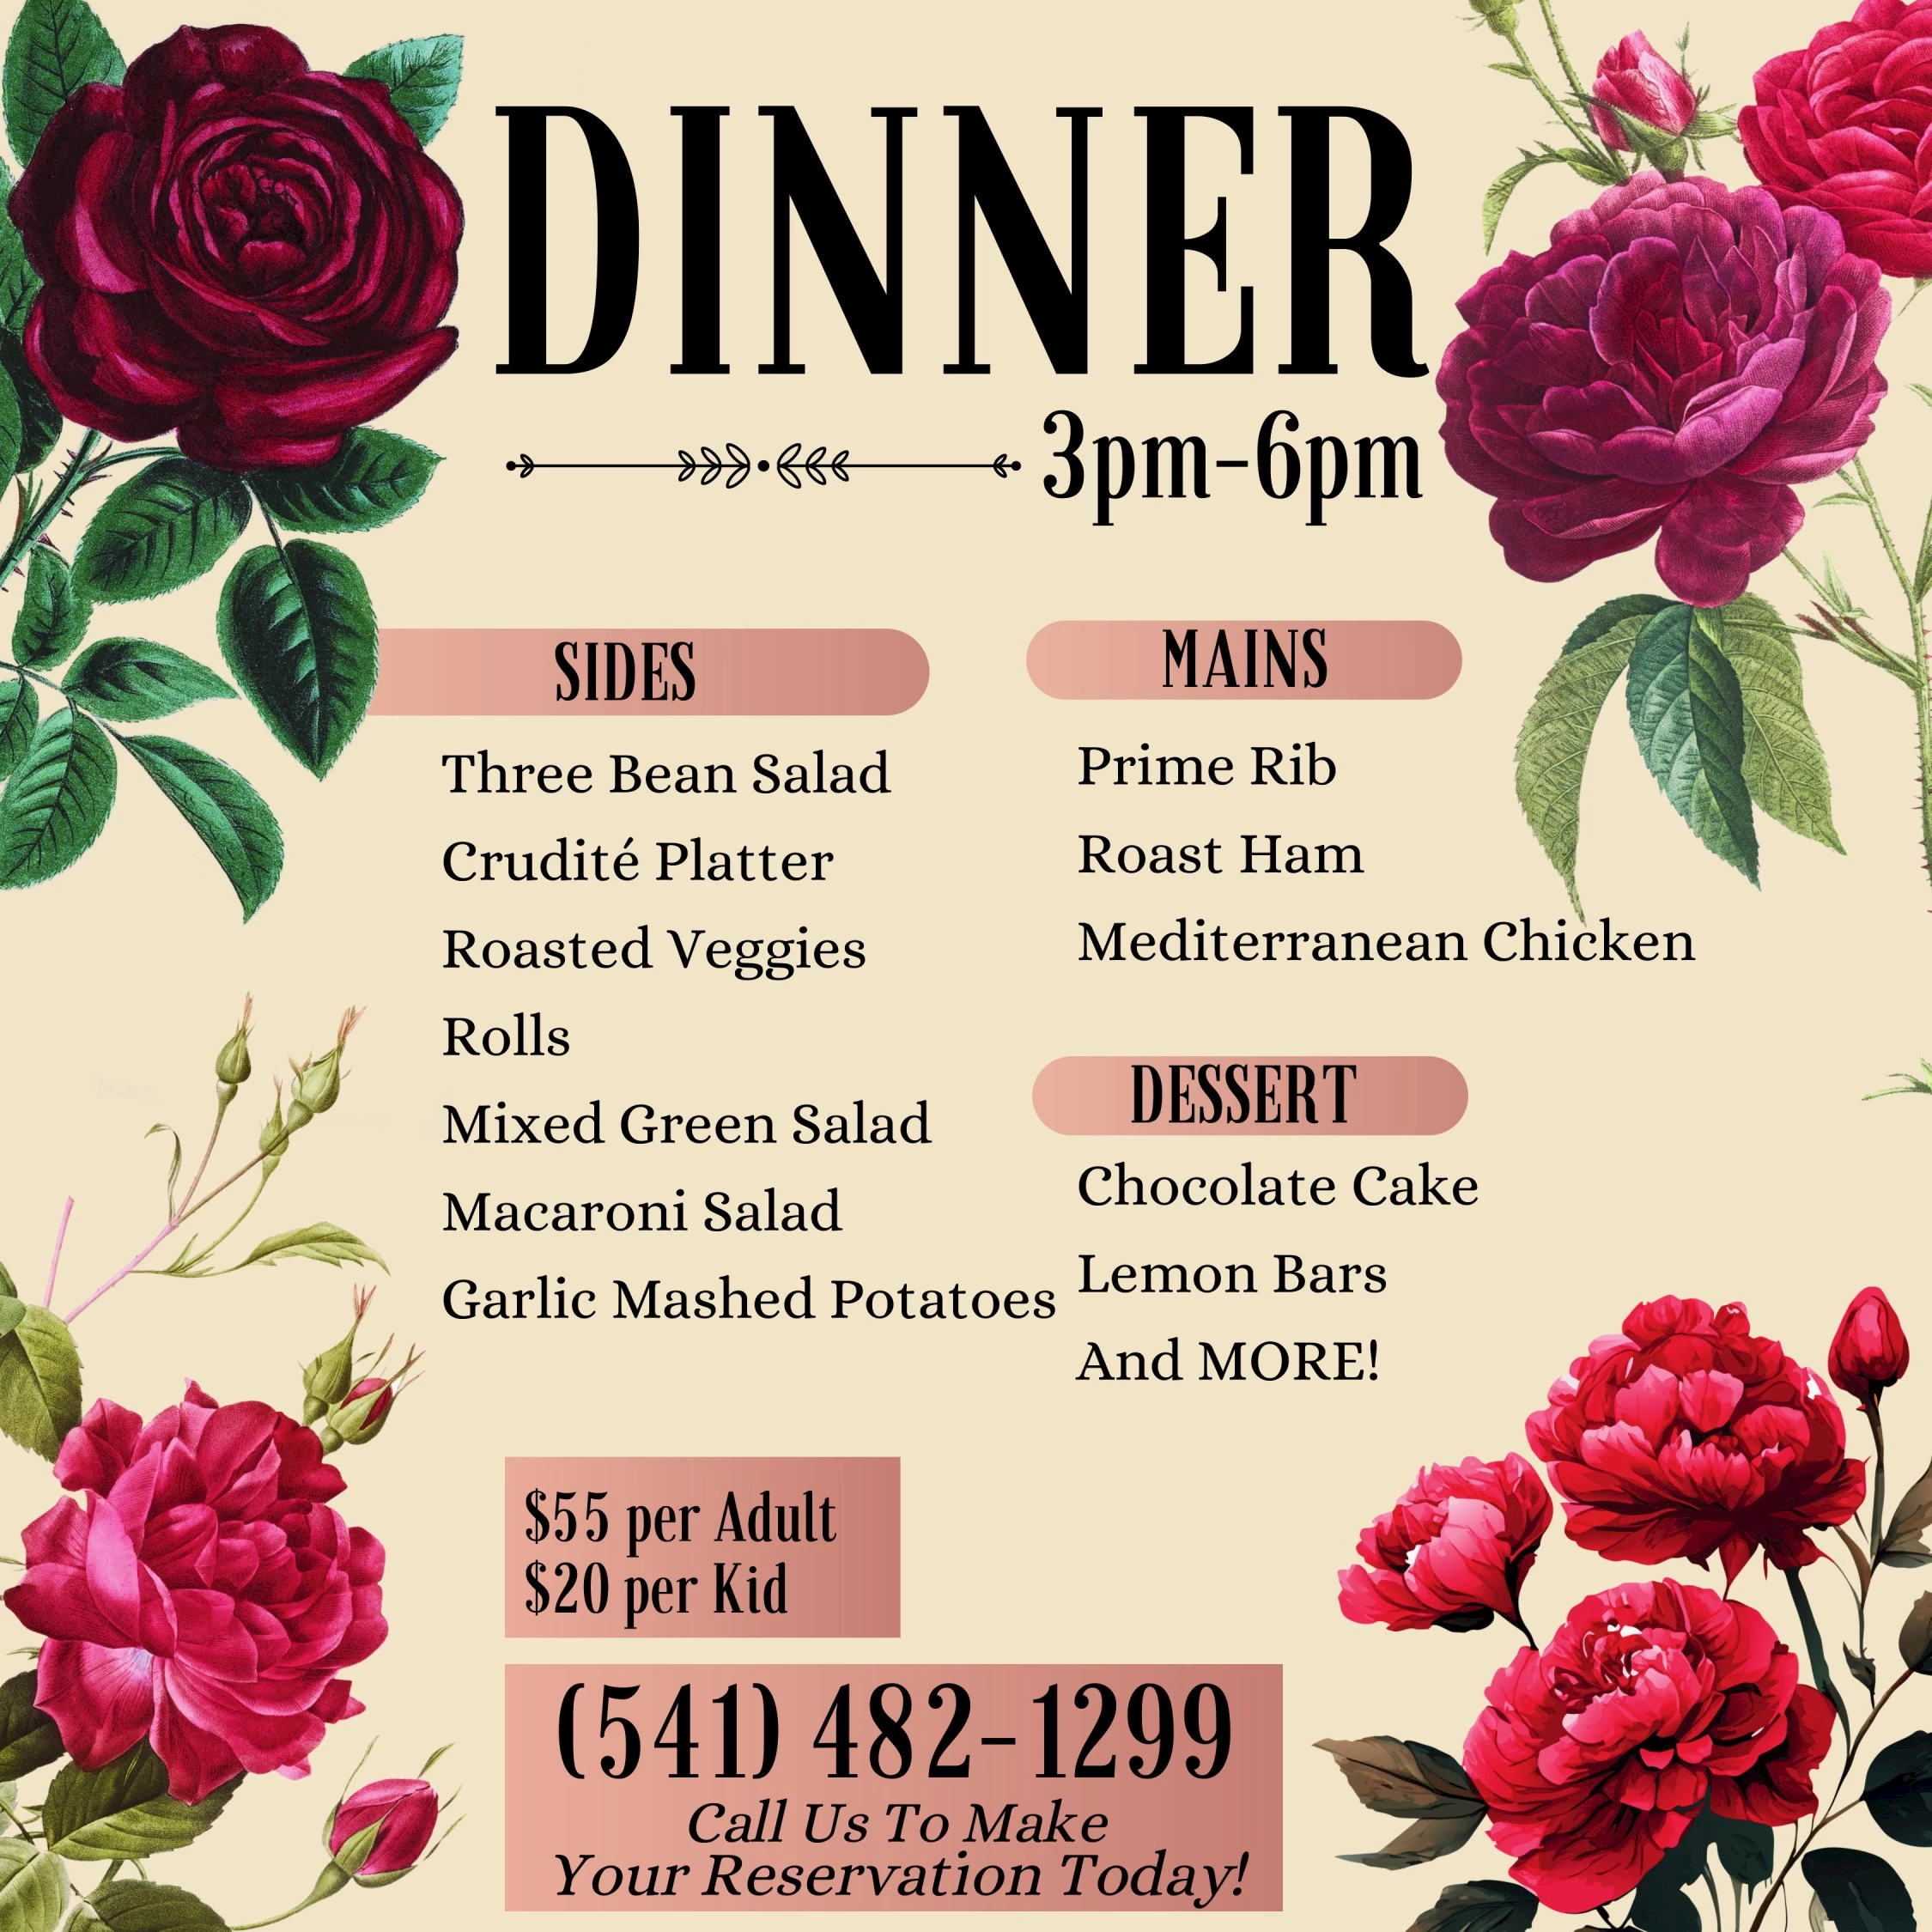 A dinner menu with sides, mains, and desserts. Dinner is from 3pm-6pm. Price: $55/adult, $20/kid. For reservations, call (541) 482-1299. Ends sentence.